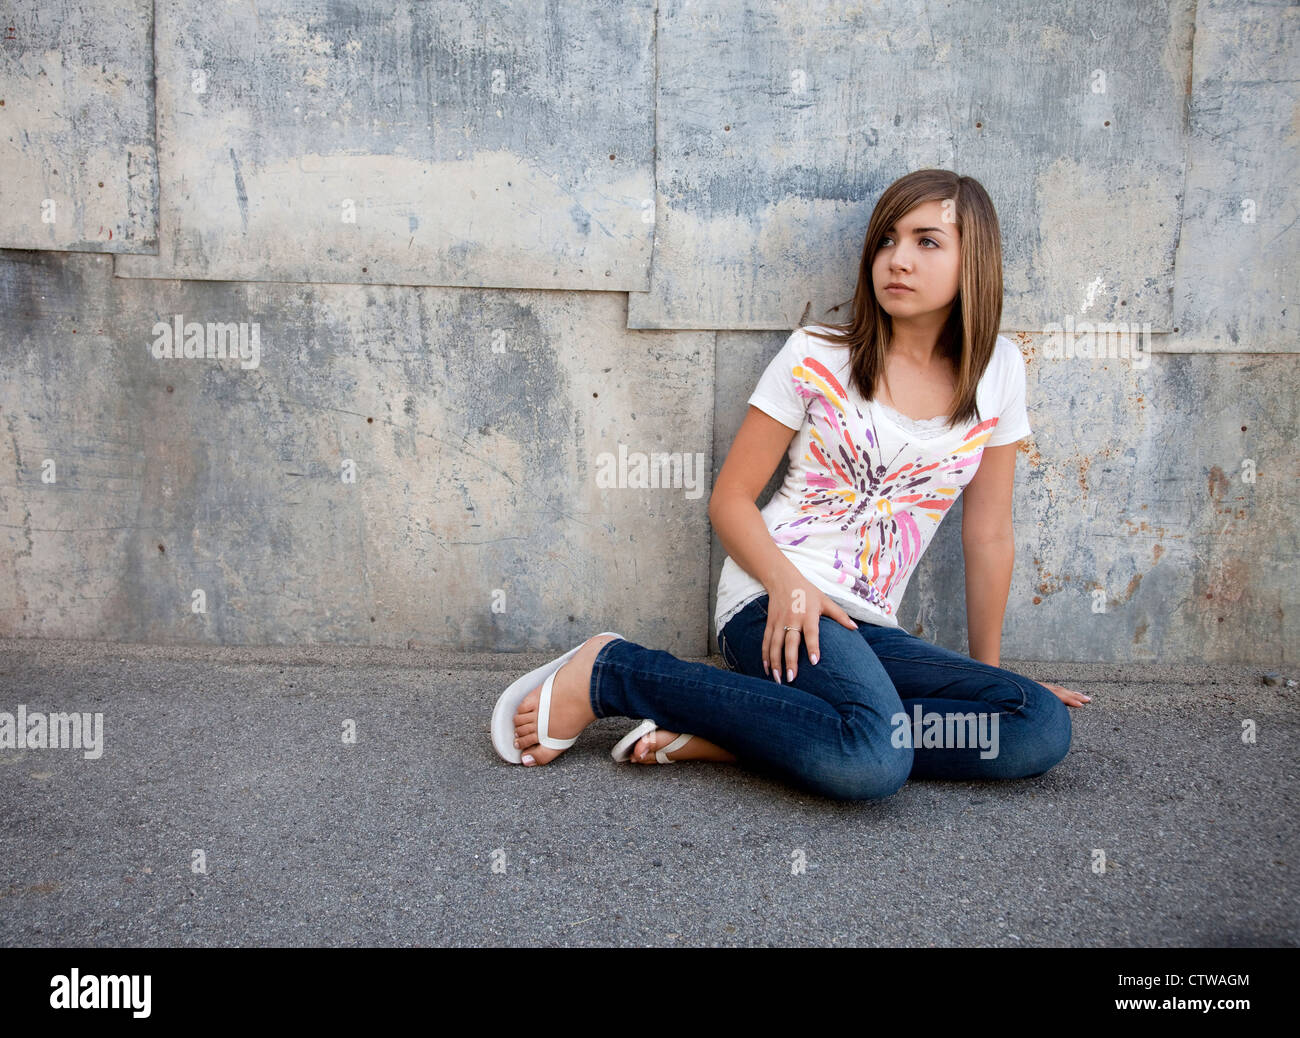 Outdoor photo of pretty teenage girl seated on pavement against grunge wall. Stock Photo